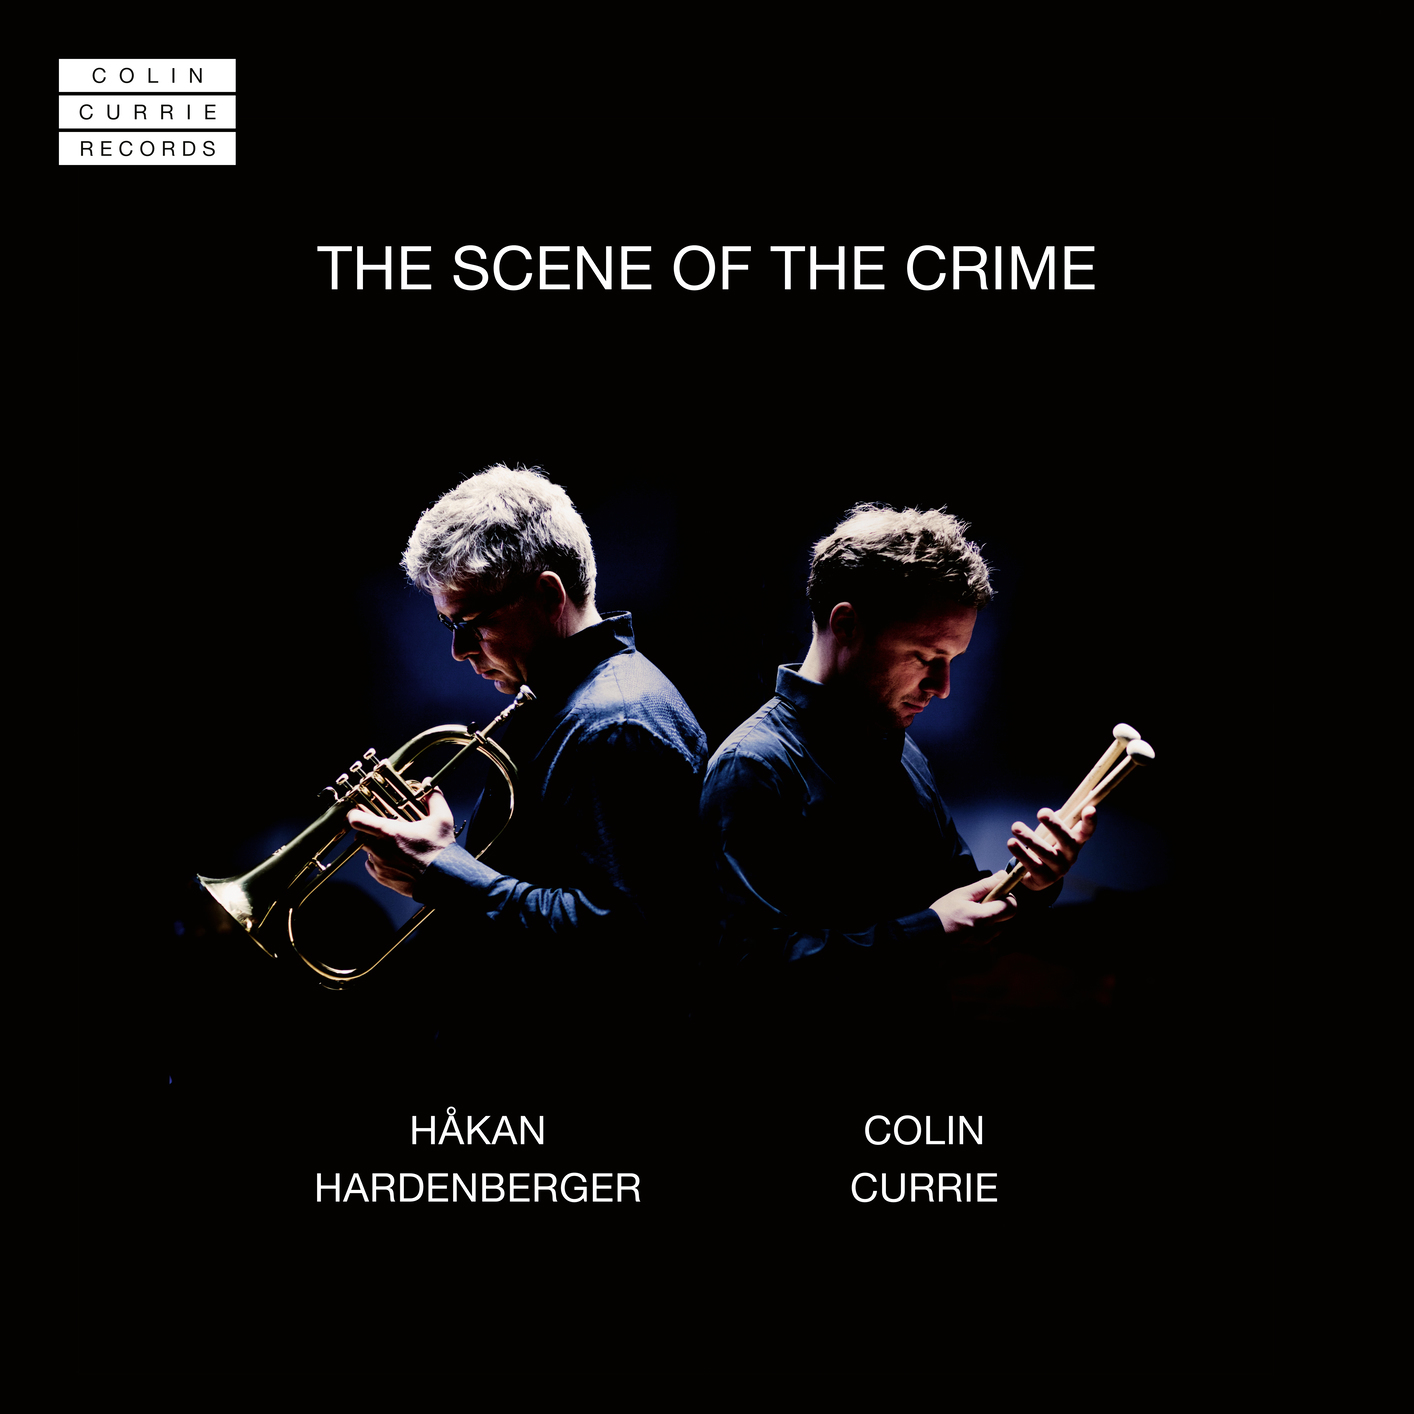 Colin Currie & Hakan Hardenberger - The Scene Of The Crime (2018) [FLAC 24bit/96kHz]